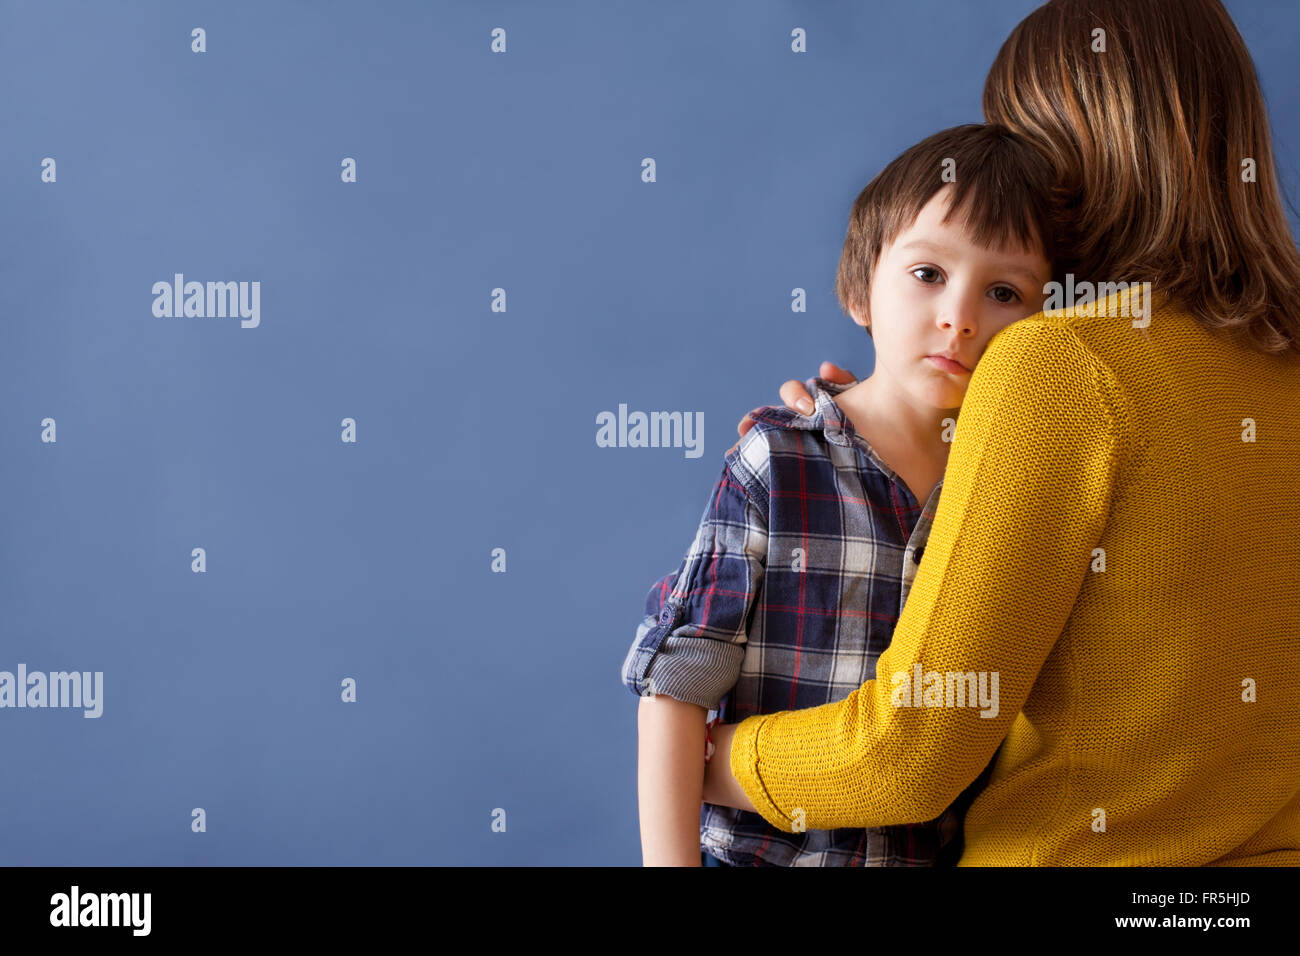 Sad little child, boy, hugging his mother at home, isolated image, copy space. Family concept Stock Photo